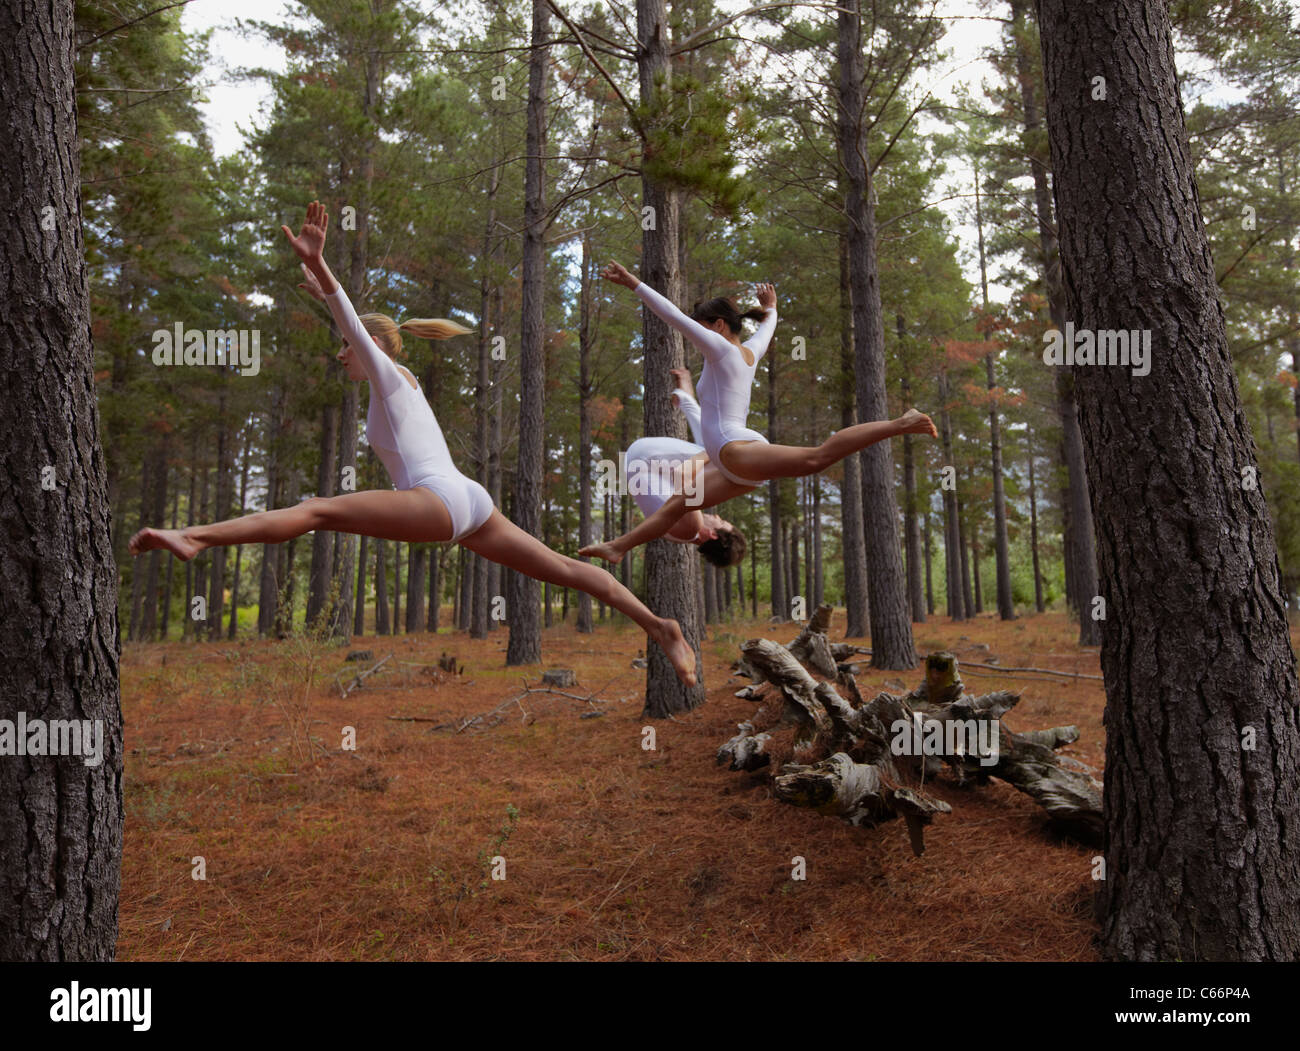 Dancers jumping in forest Stock Photo